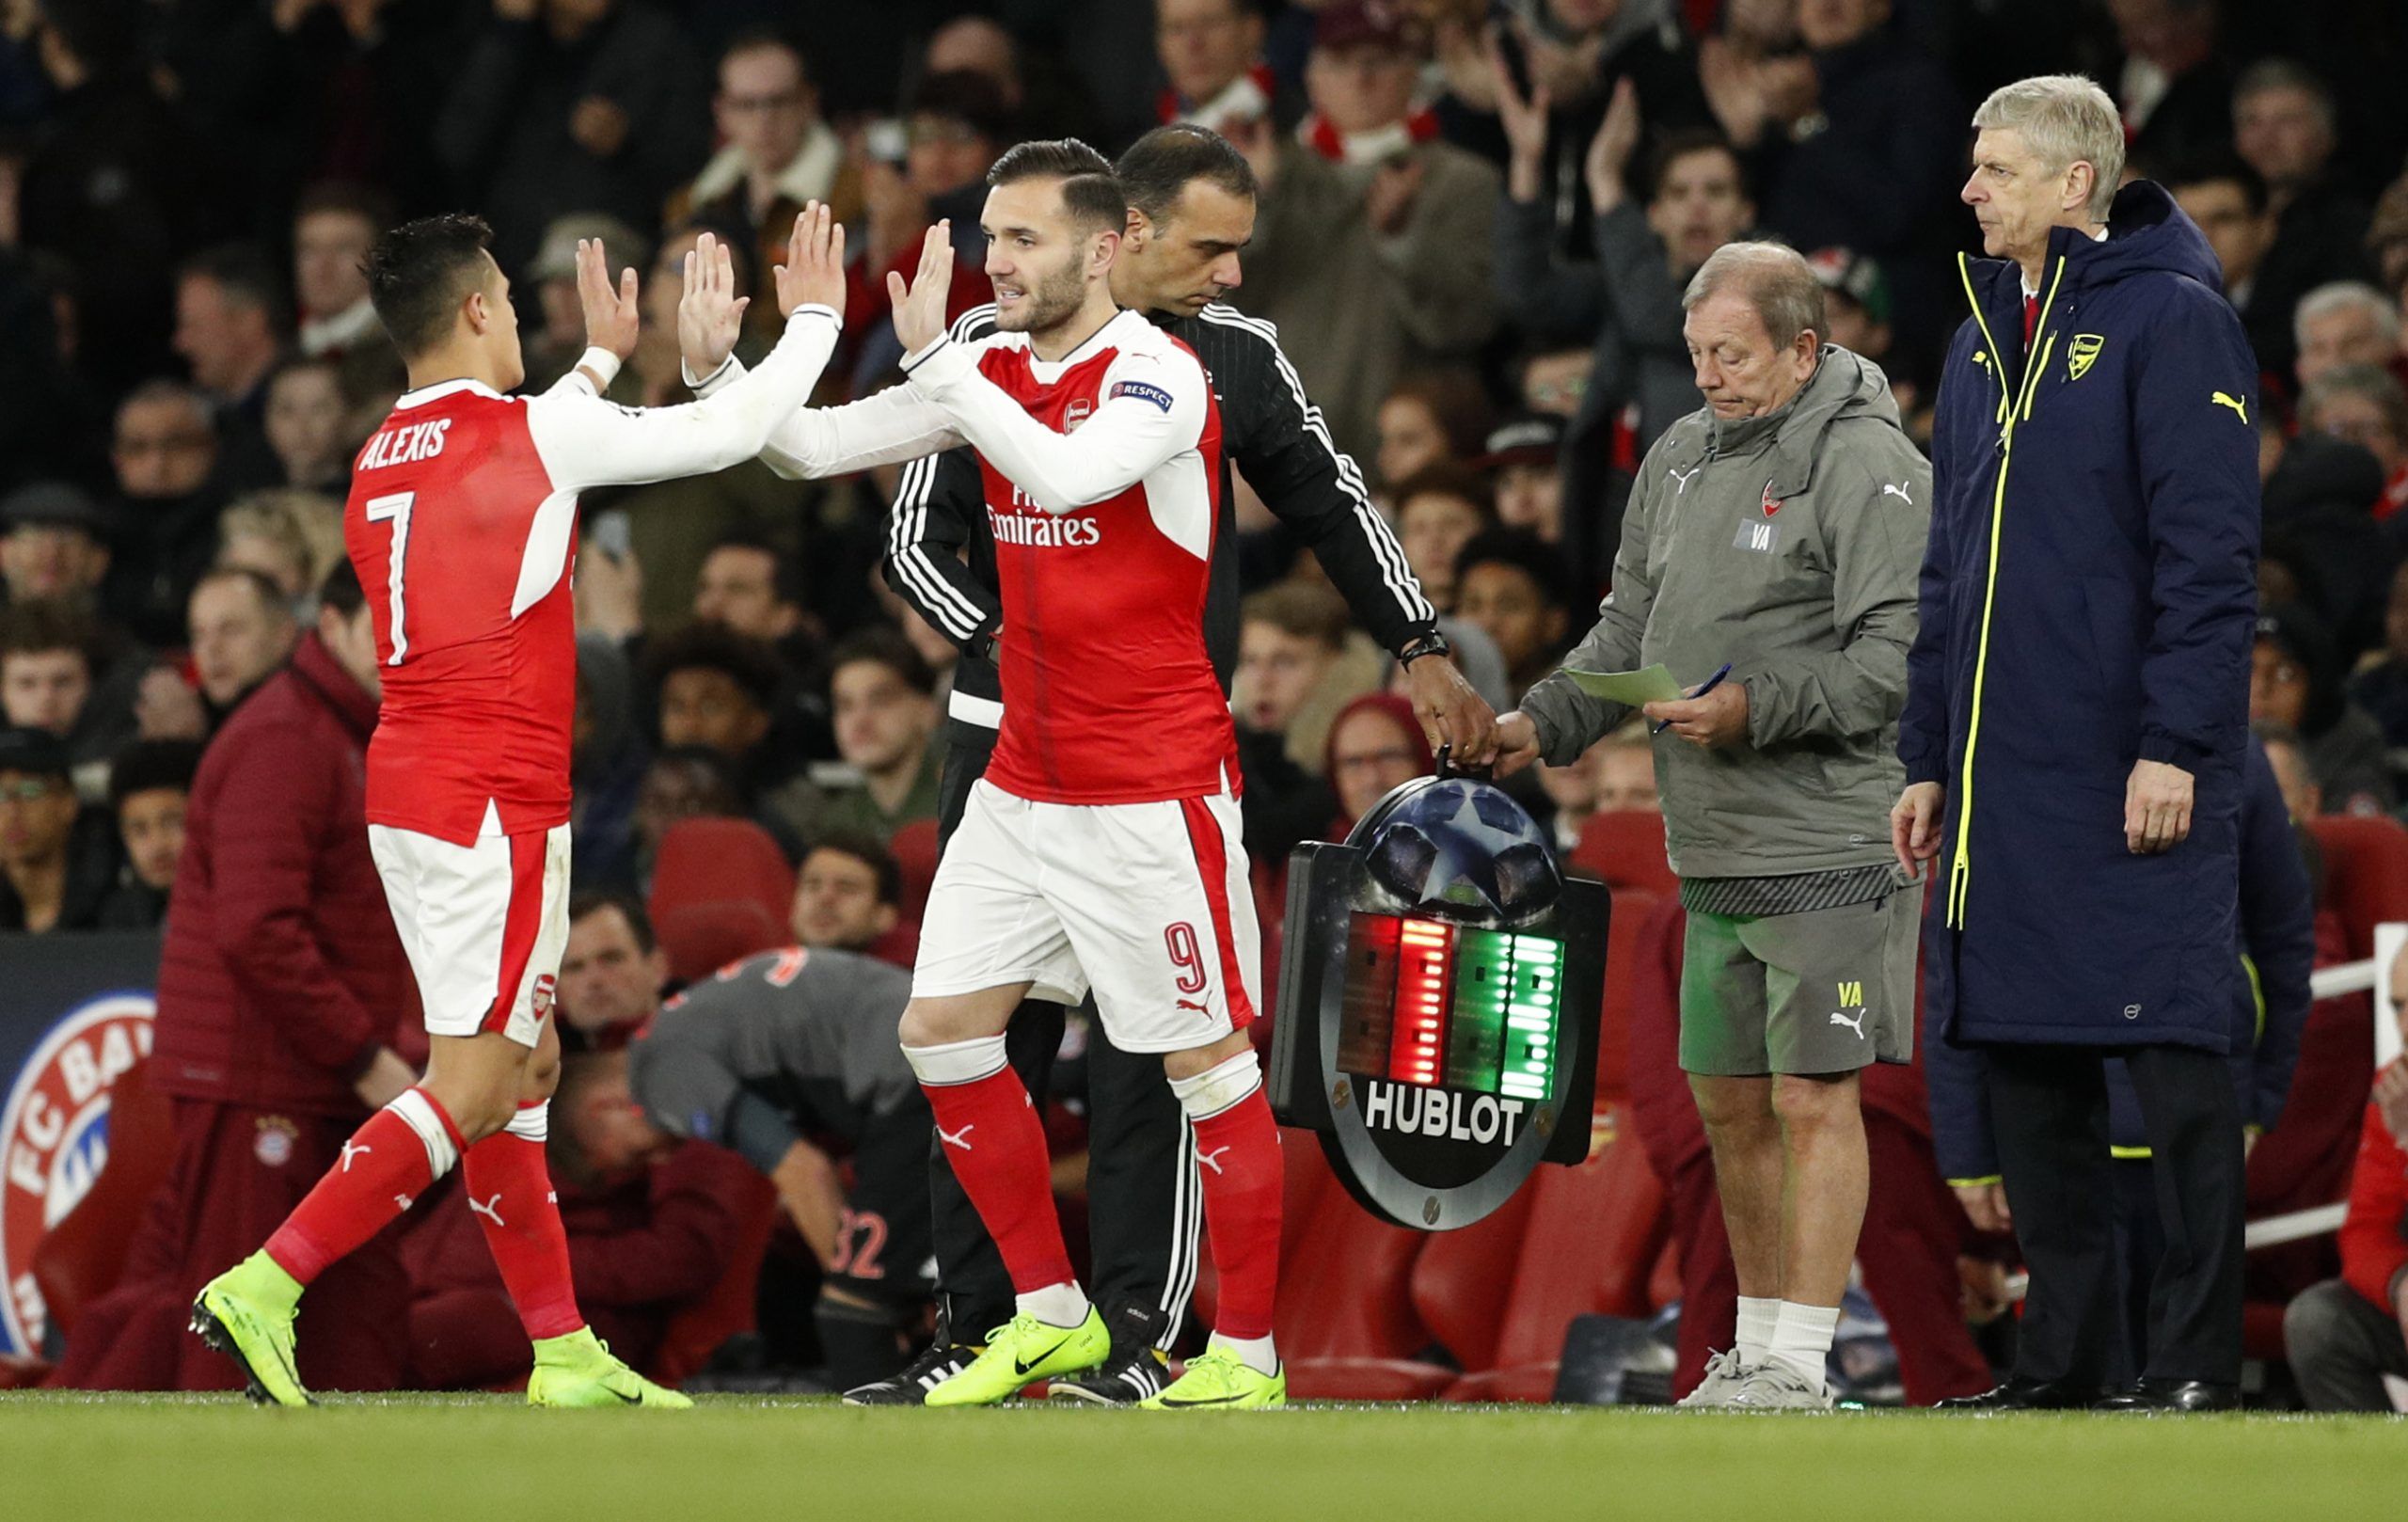 Britain Football Soccer - Arsenal v Bayern Munich - UEFA Champions League Round of 16 Second Leg - Emirates Stadium, London, England - 7/3/17 Arsenal's Lucas Perez comes on as a substitute to replace Alexis Sanchez as manager Arsene Wenger looks on  Action Images via Reuters / John Sibley Livepic